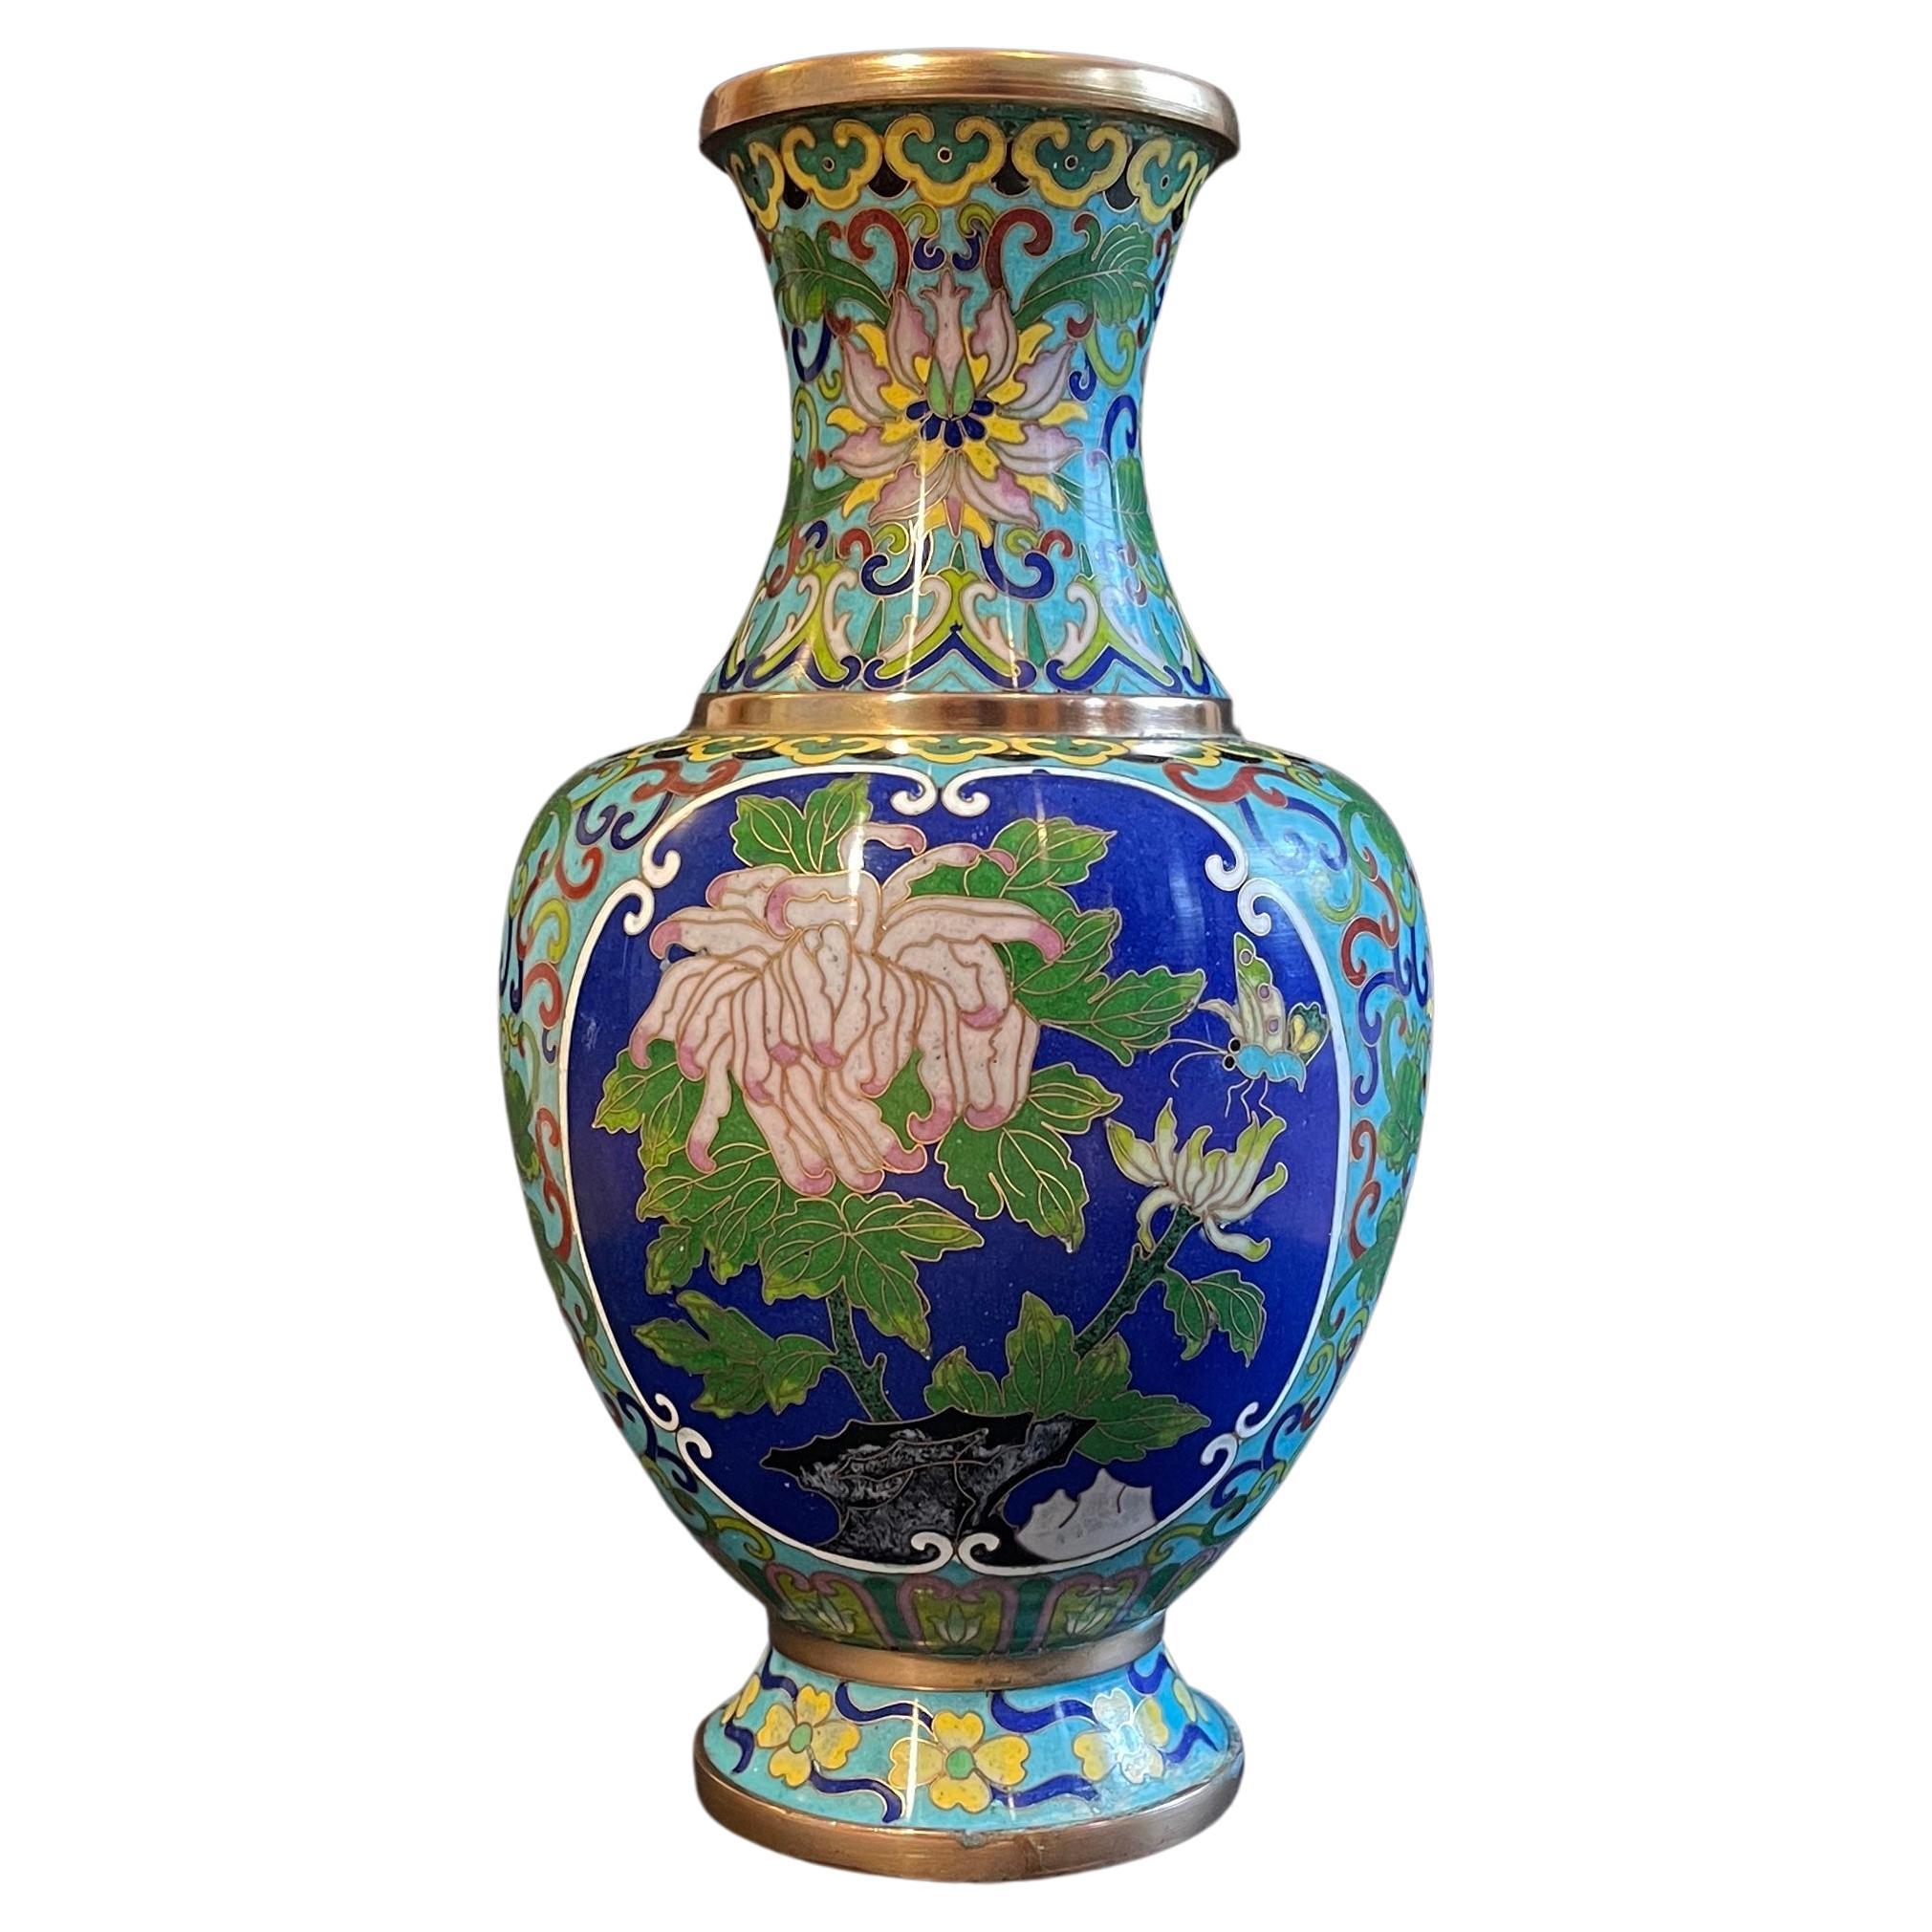 1960s Chinese Cloisonné Vase Turquoise Enamel Inlay Chrysanthemum & Butterflies For Sale